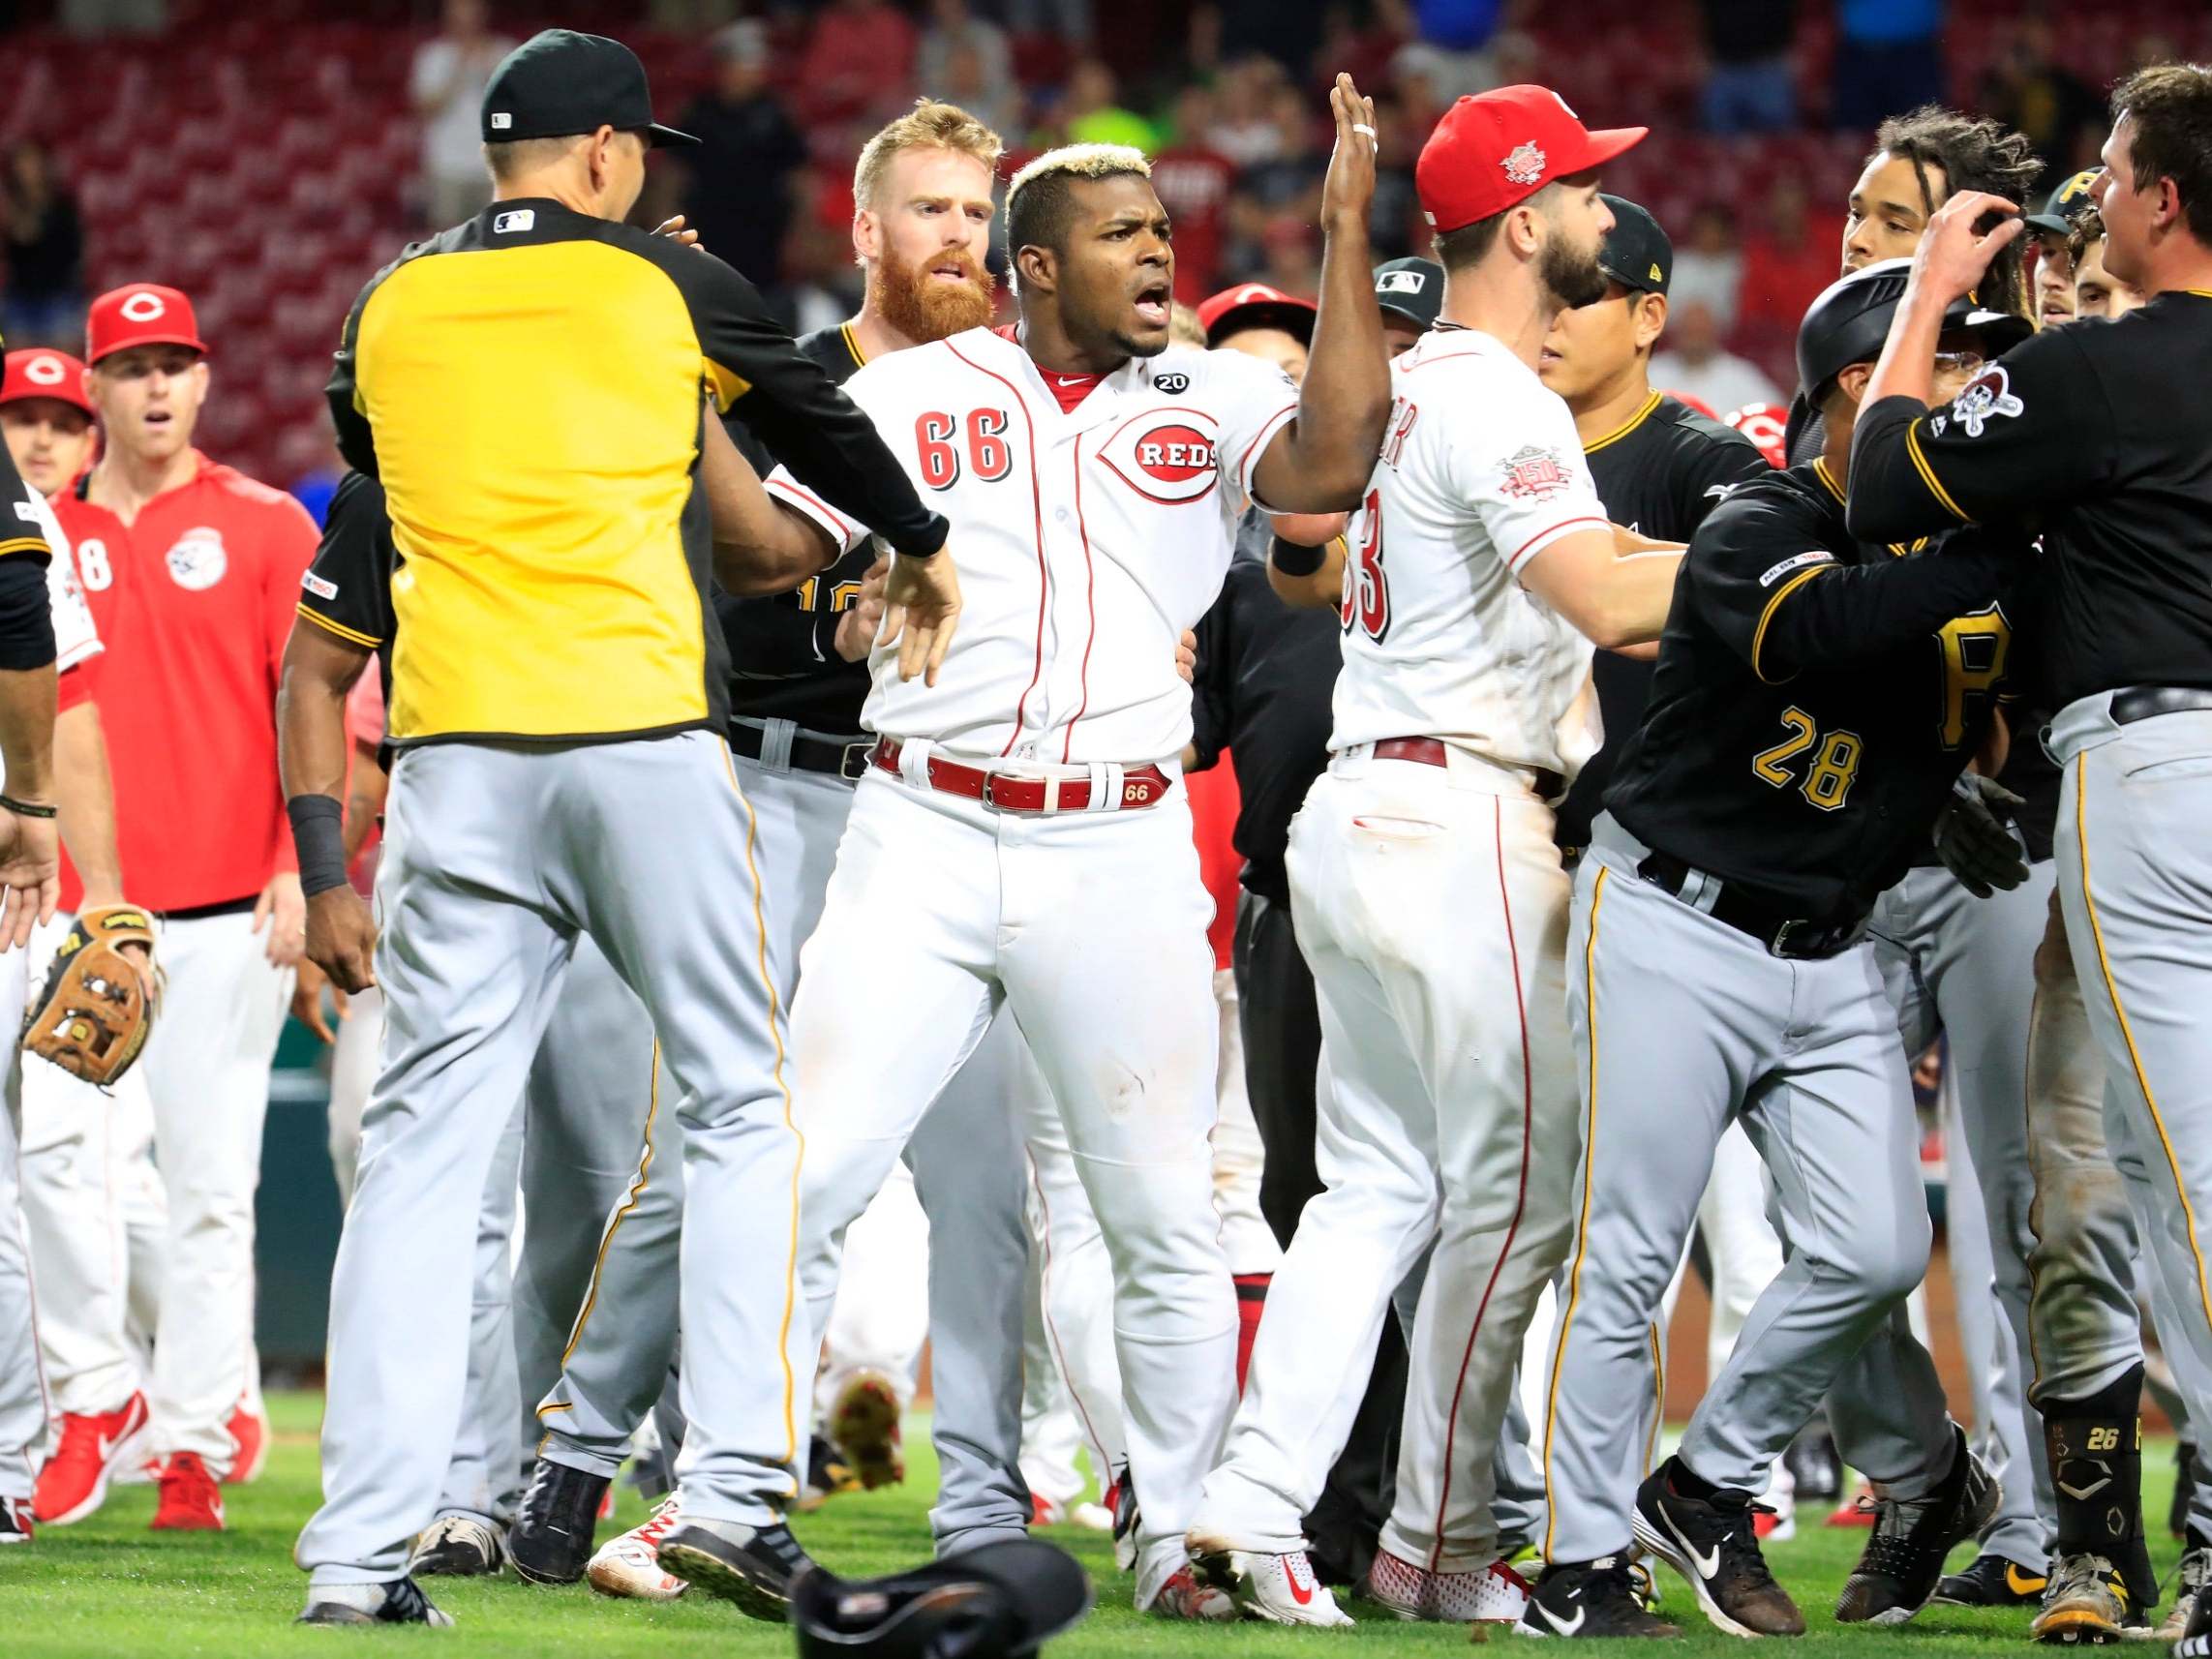 Yasiel Puig is ejected and traded in same inning as Reds and Pirates brawl, Cincinnati Reds